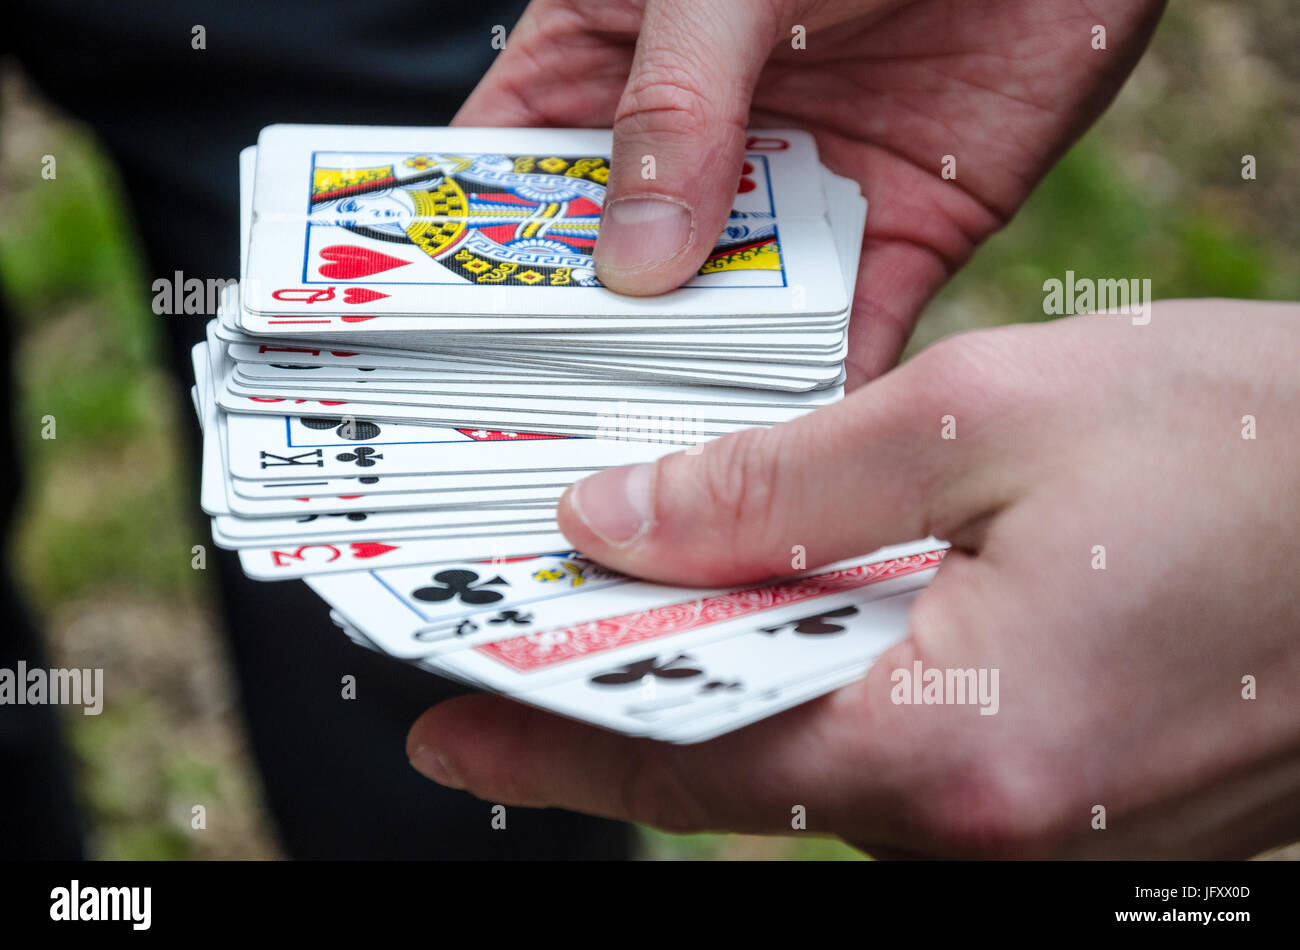 A hand holding a deck of playing cards. Stock Photo